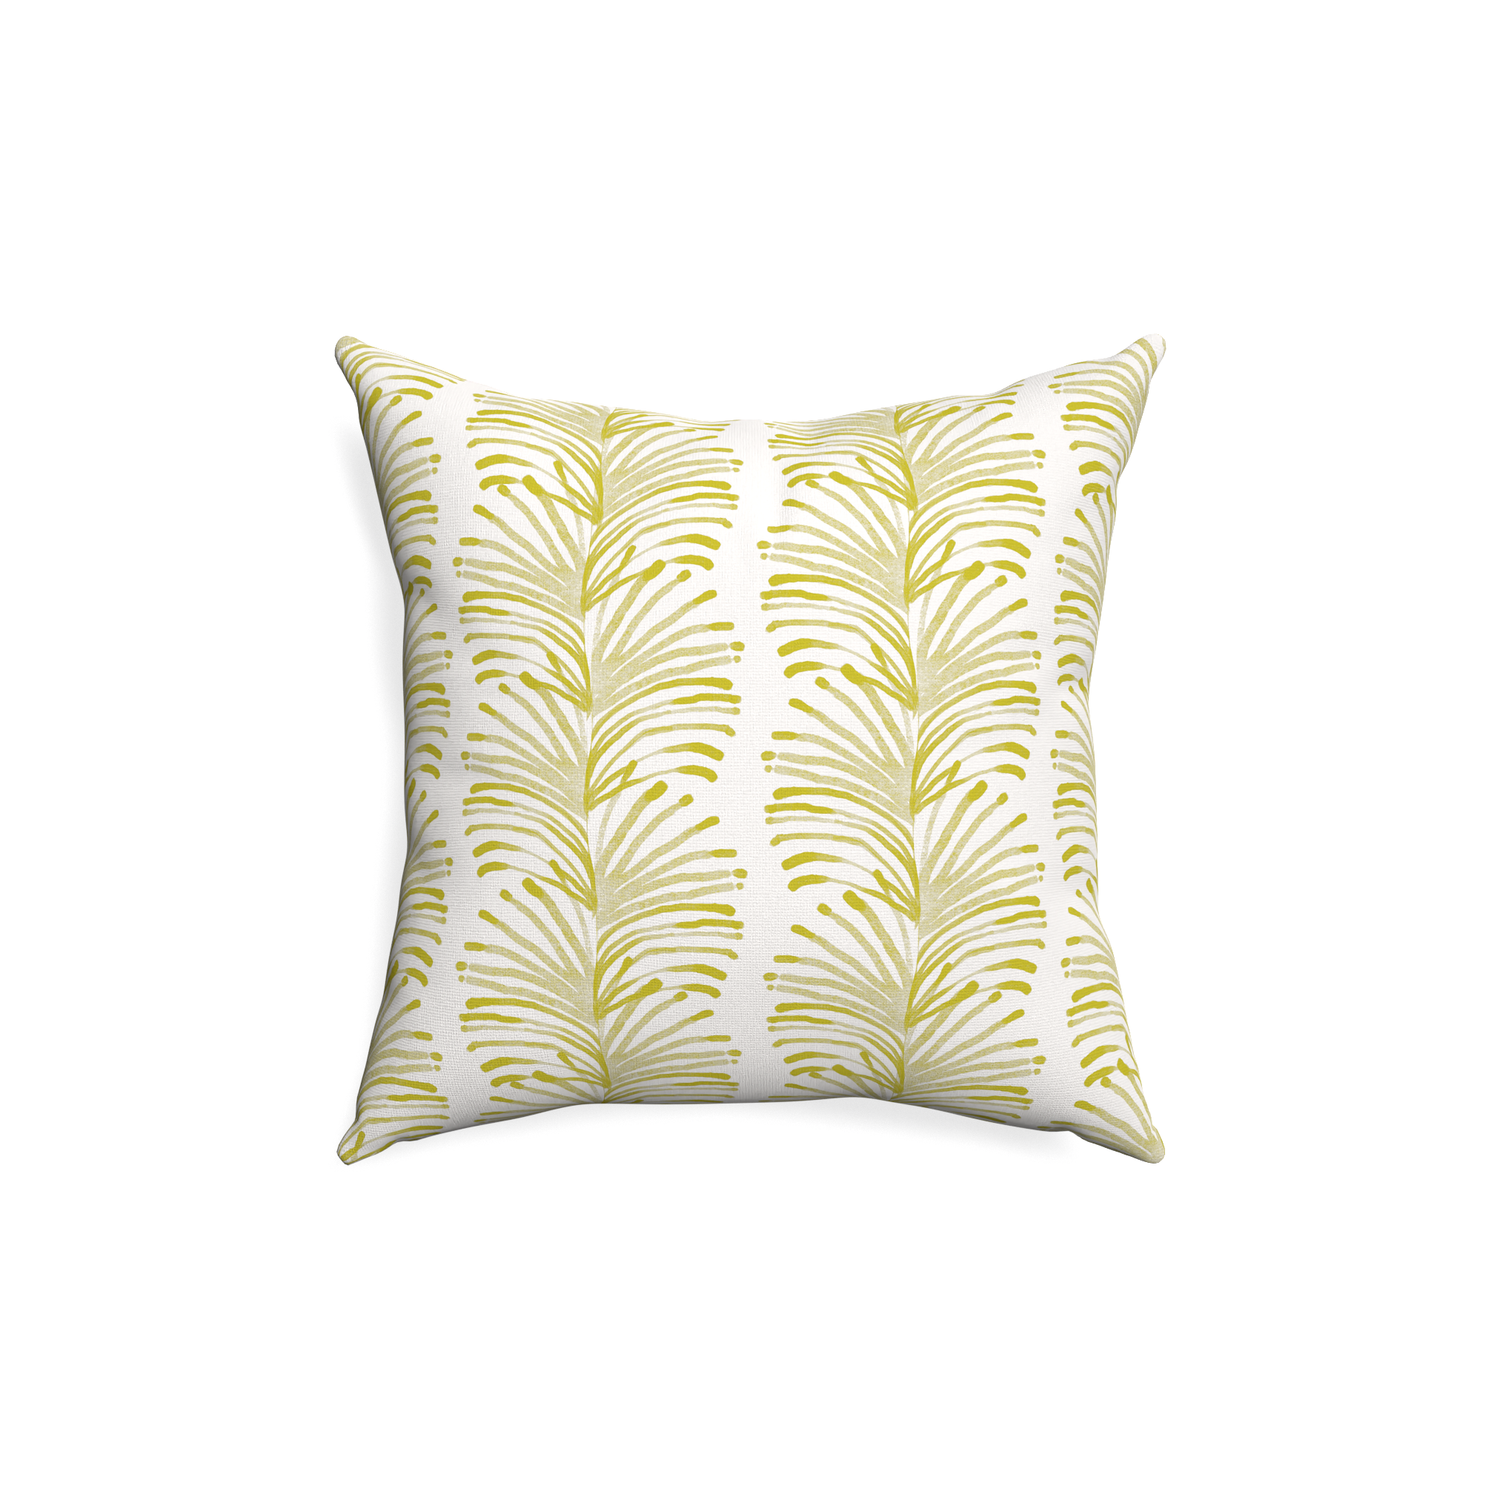 18-square emma chartreuse custom pillow with none on white background